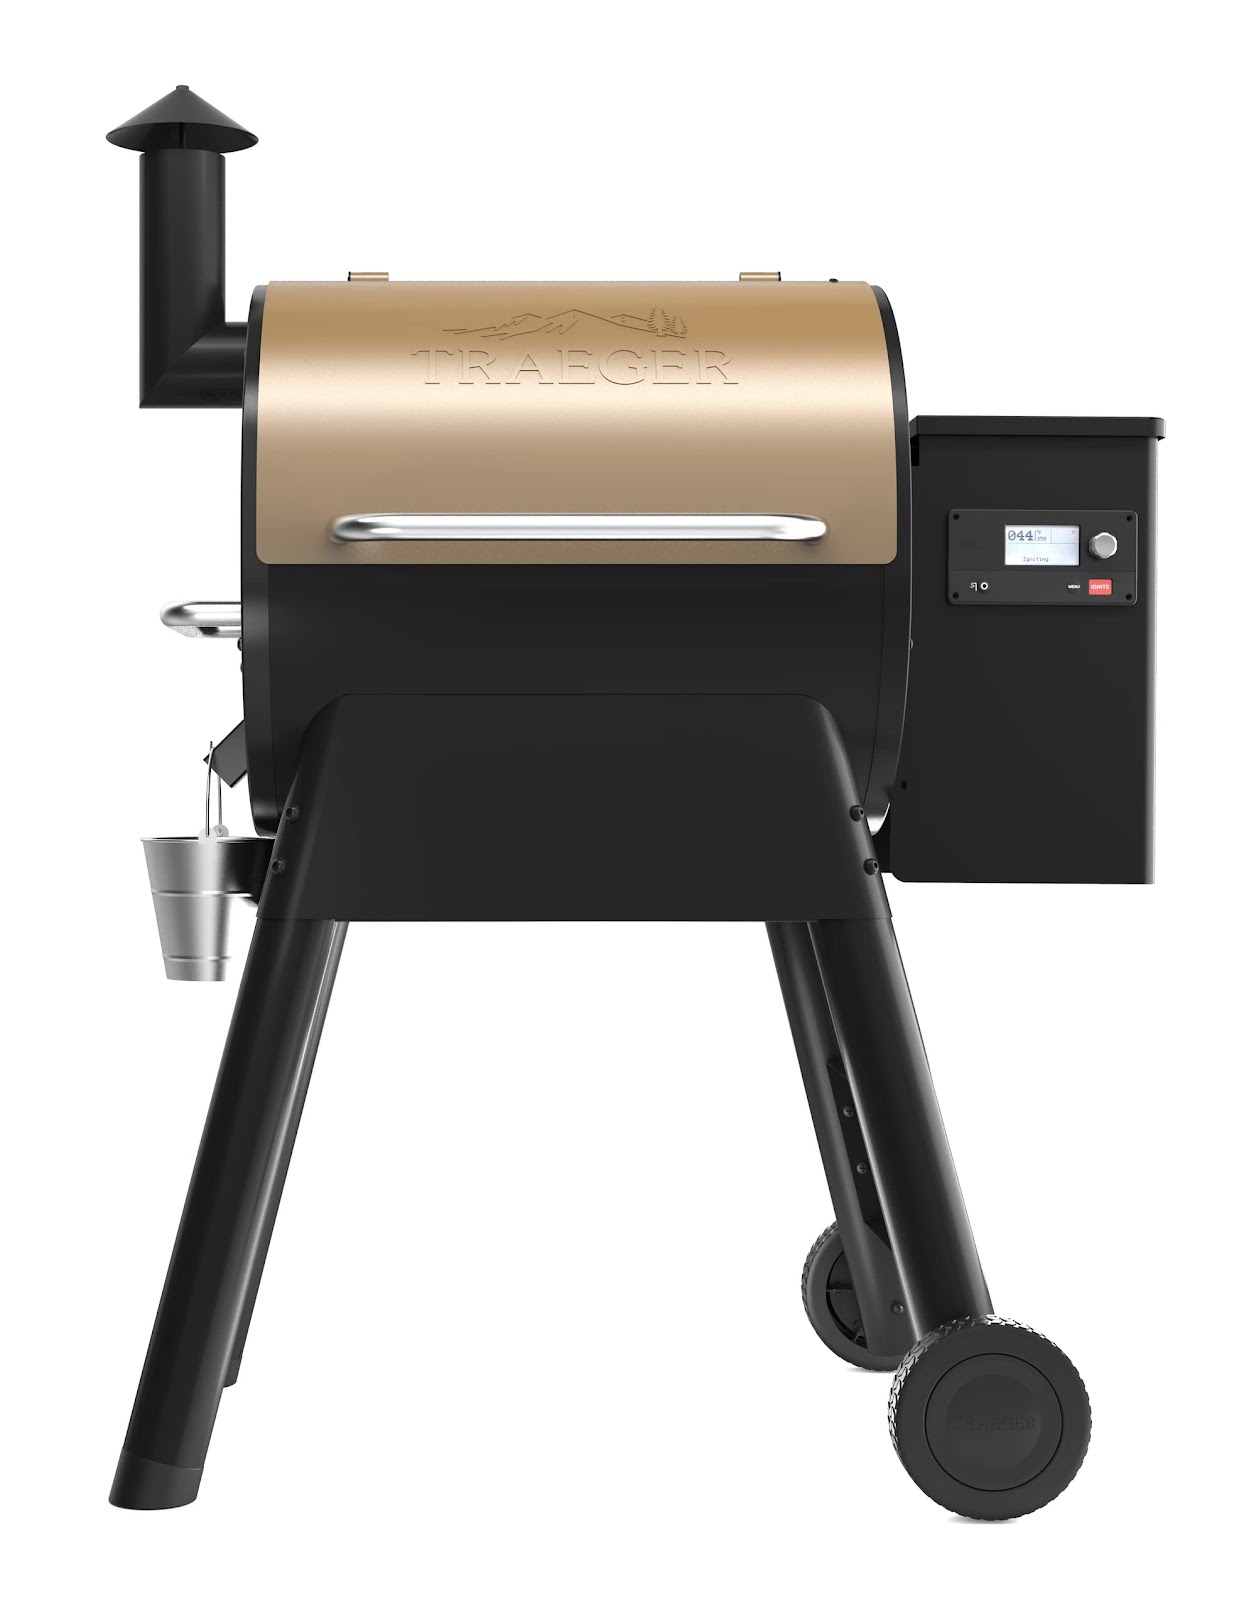 Traeger Pro Series 575 Wood Pellet Grill and Smoker with Wifi